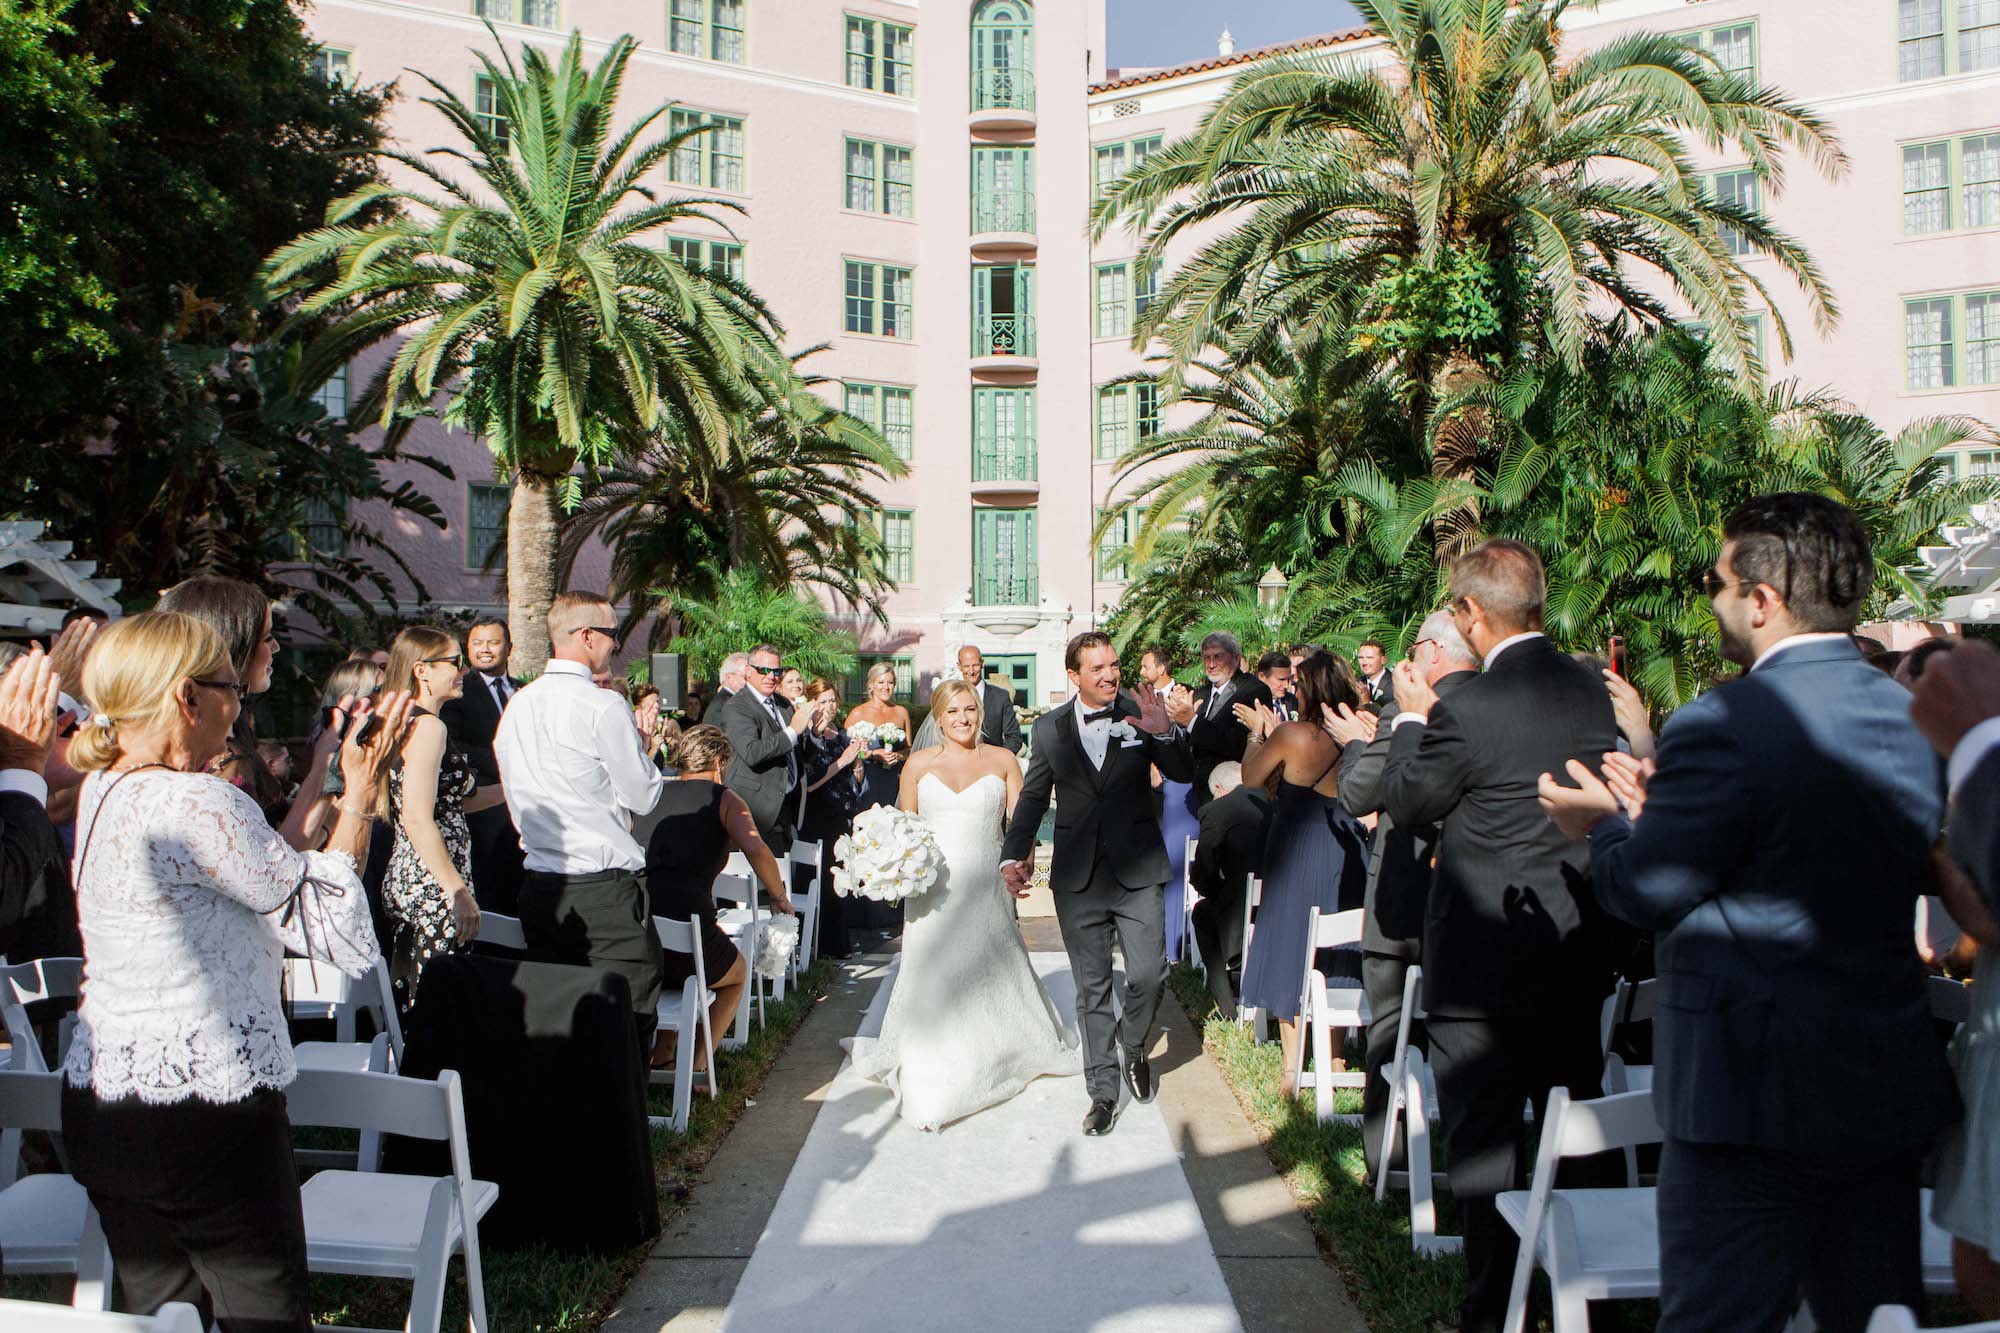 Timeless Classic Bride and Groom Exchanging Wedding Vows During Courtyard Wedding Ceremony | St. Pete Wedding Venue The Vinoy Renaissance